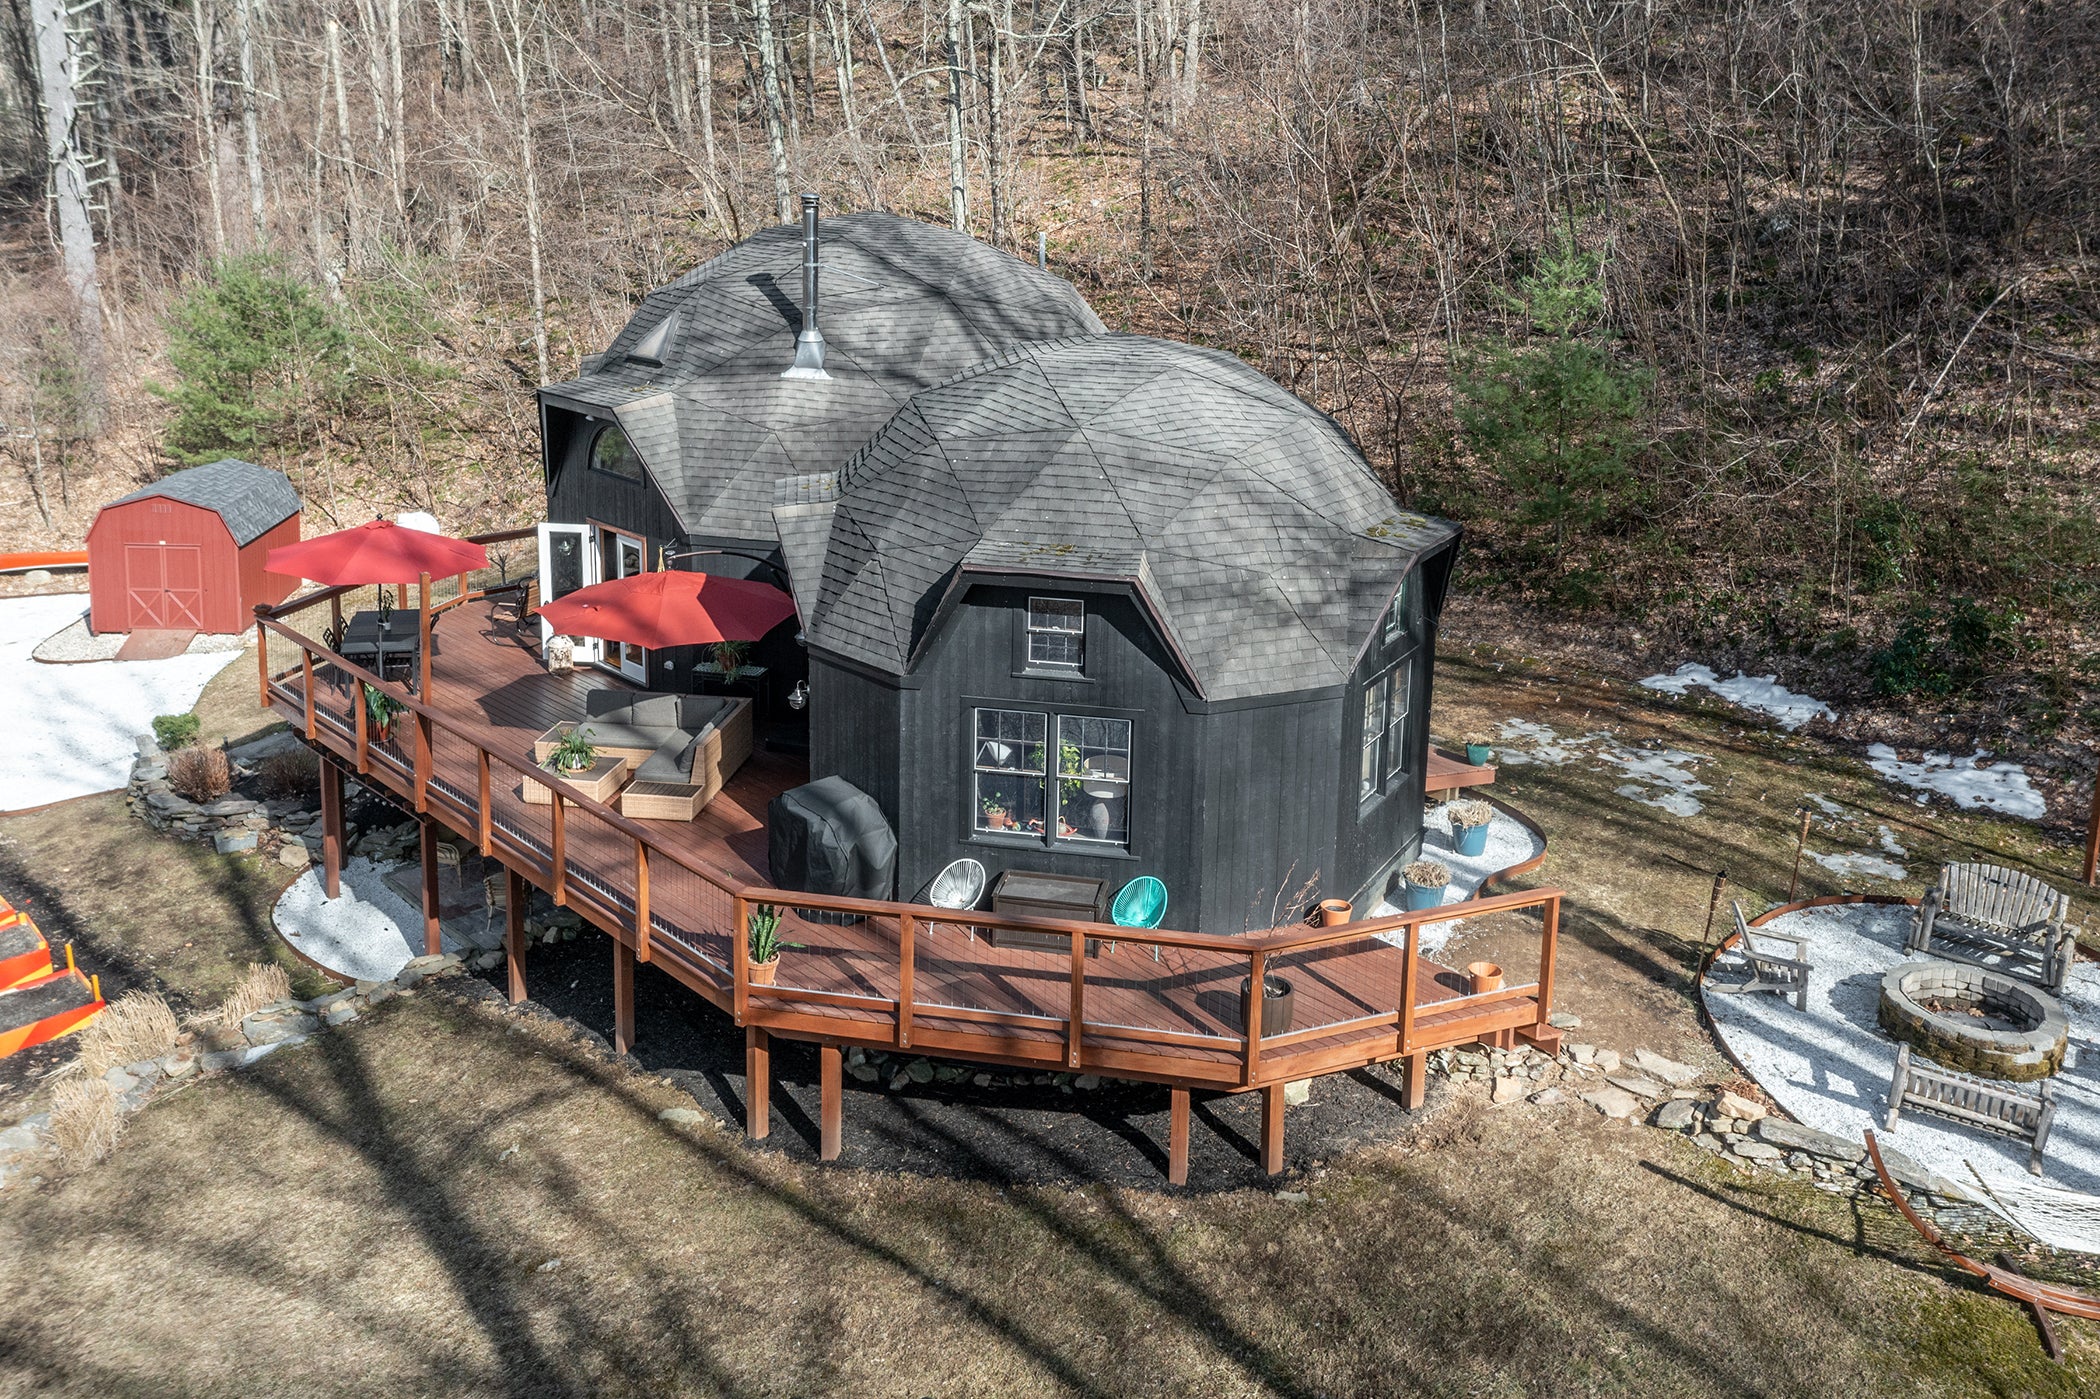 For $324,900, a concrete-and-glass dome in Southbridge